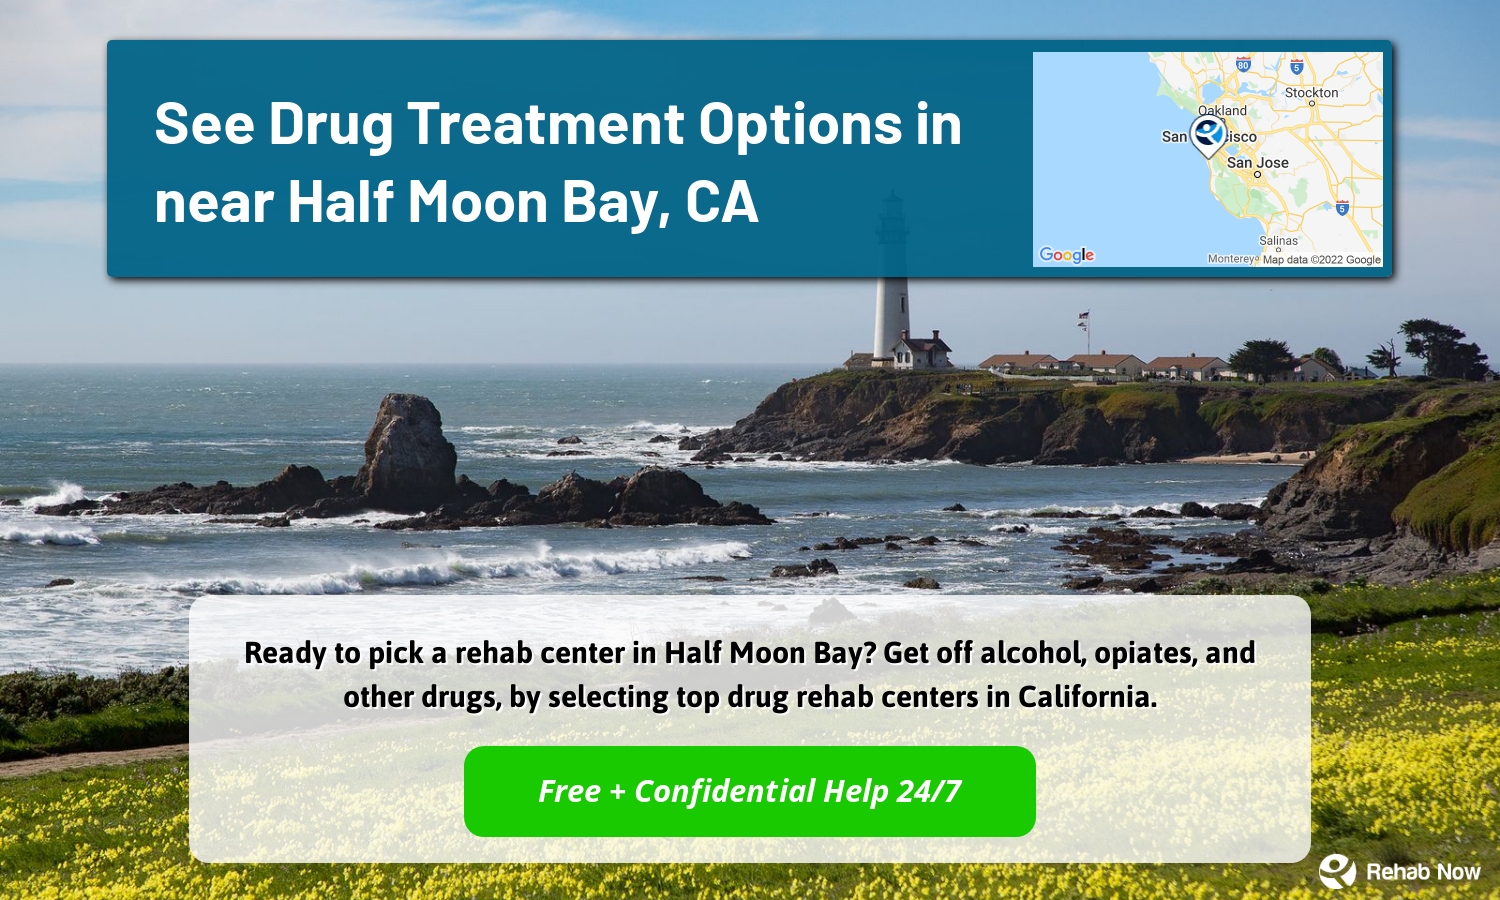 Ready to pick a rehab center in Half Moon Bay? Get off alcohol, opiates, and other drugs, by selecting top drug rehab centers in California.